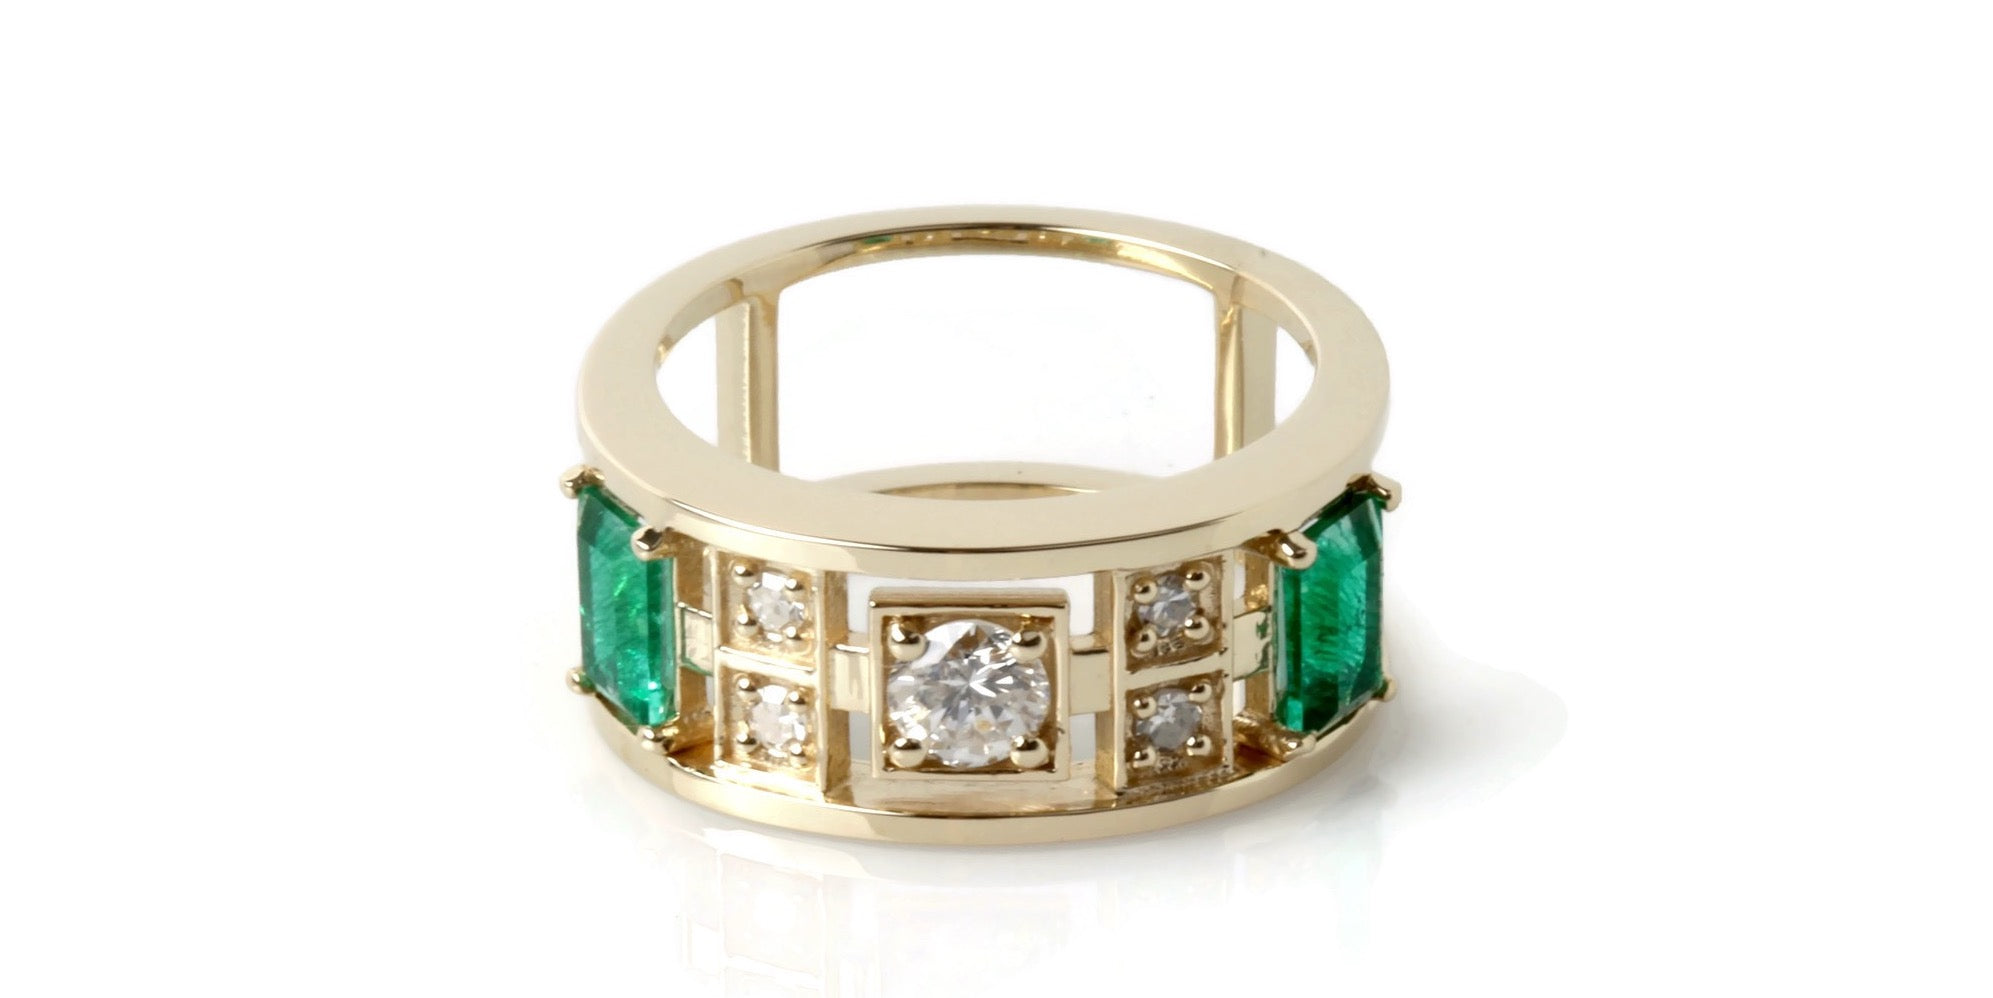 Heirloom Jewelry Becomes Modern Ring